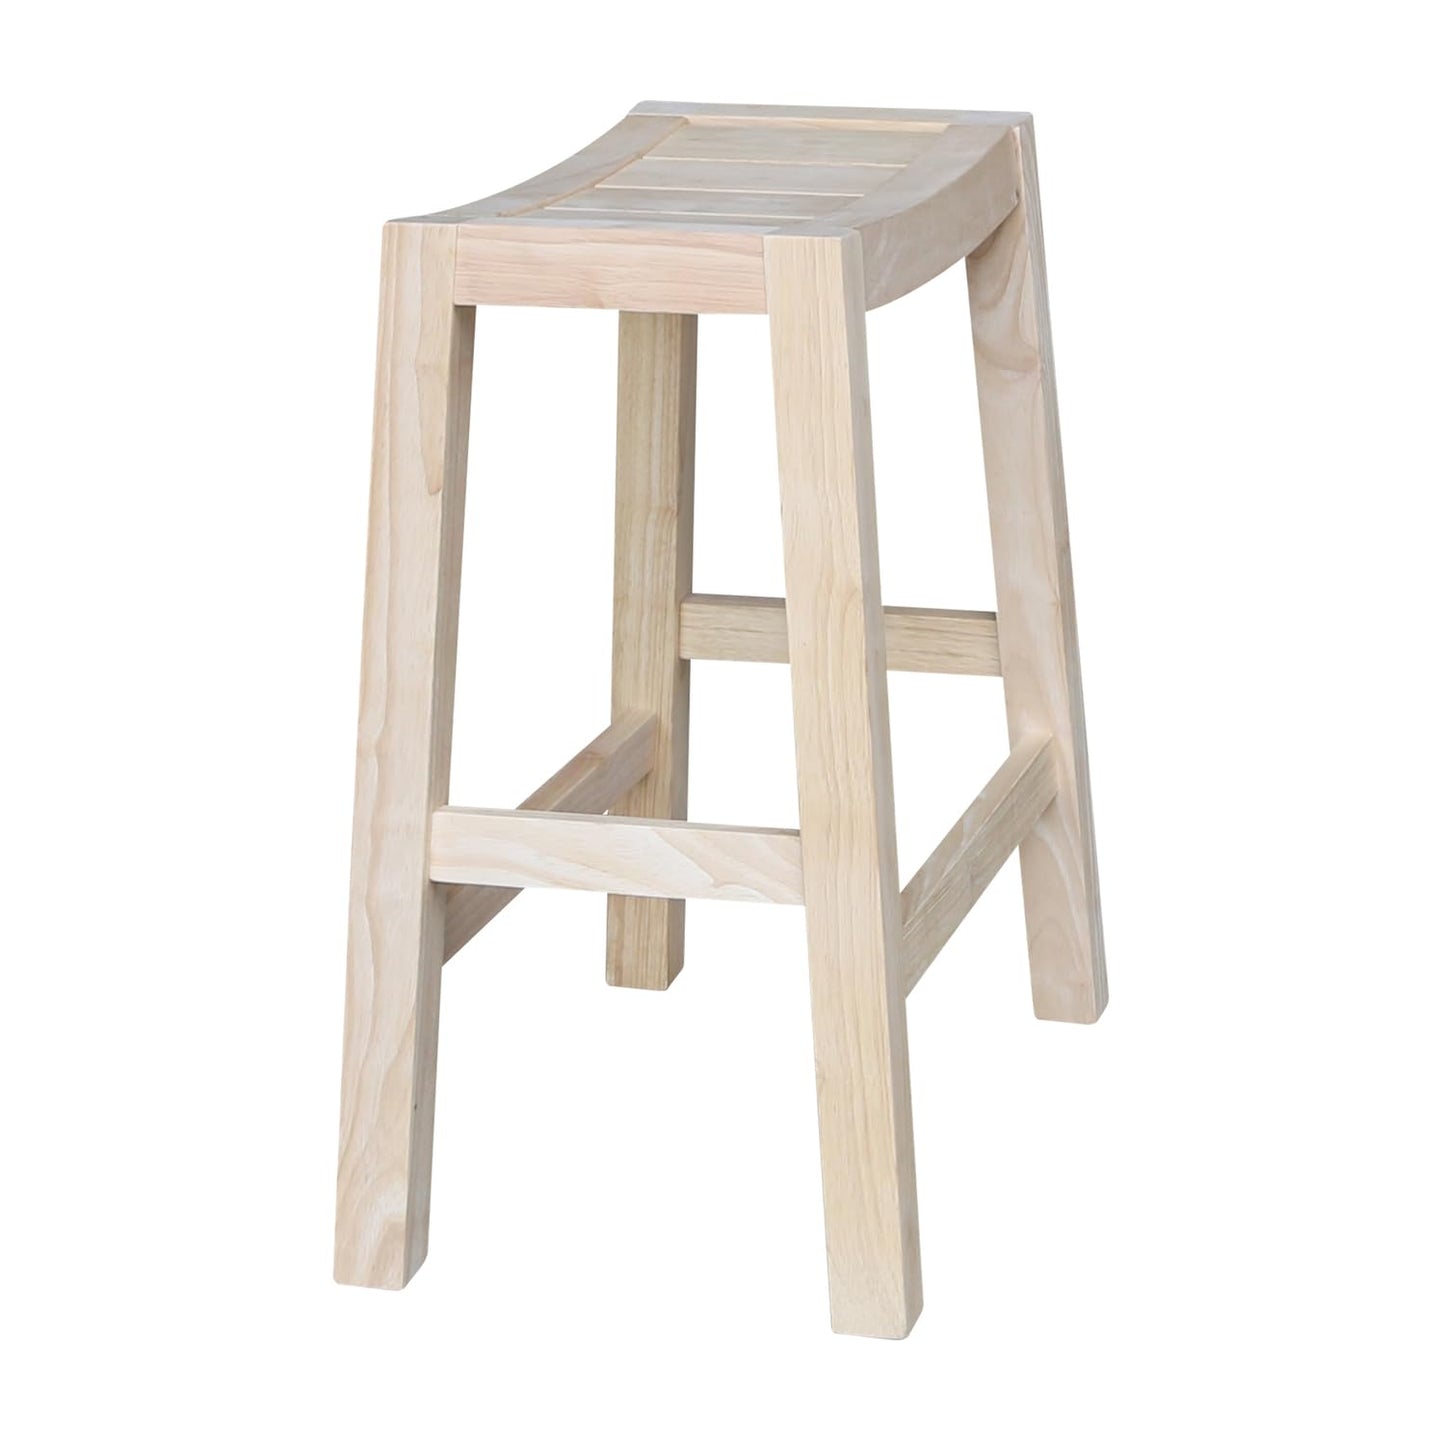 IC International Concepts International Concepts Ranch, 24-Inch, Ready to Finish Stool, Unfinished